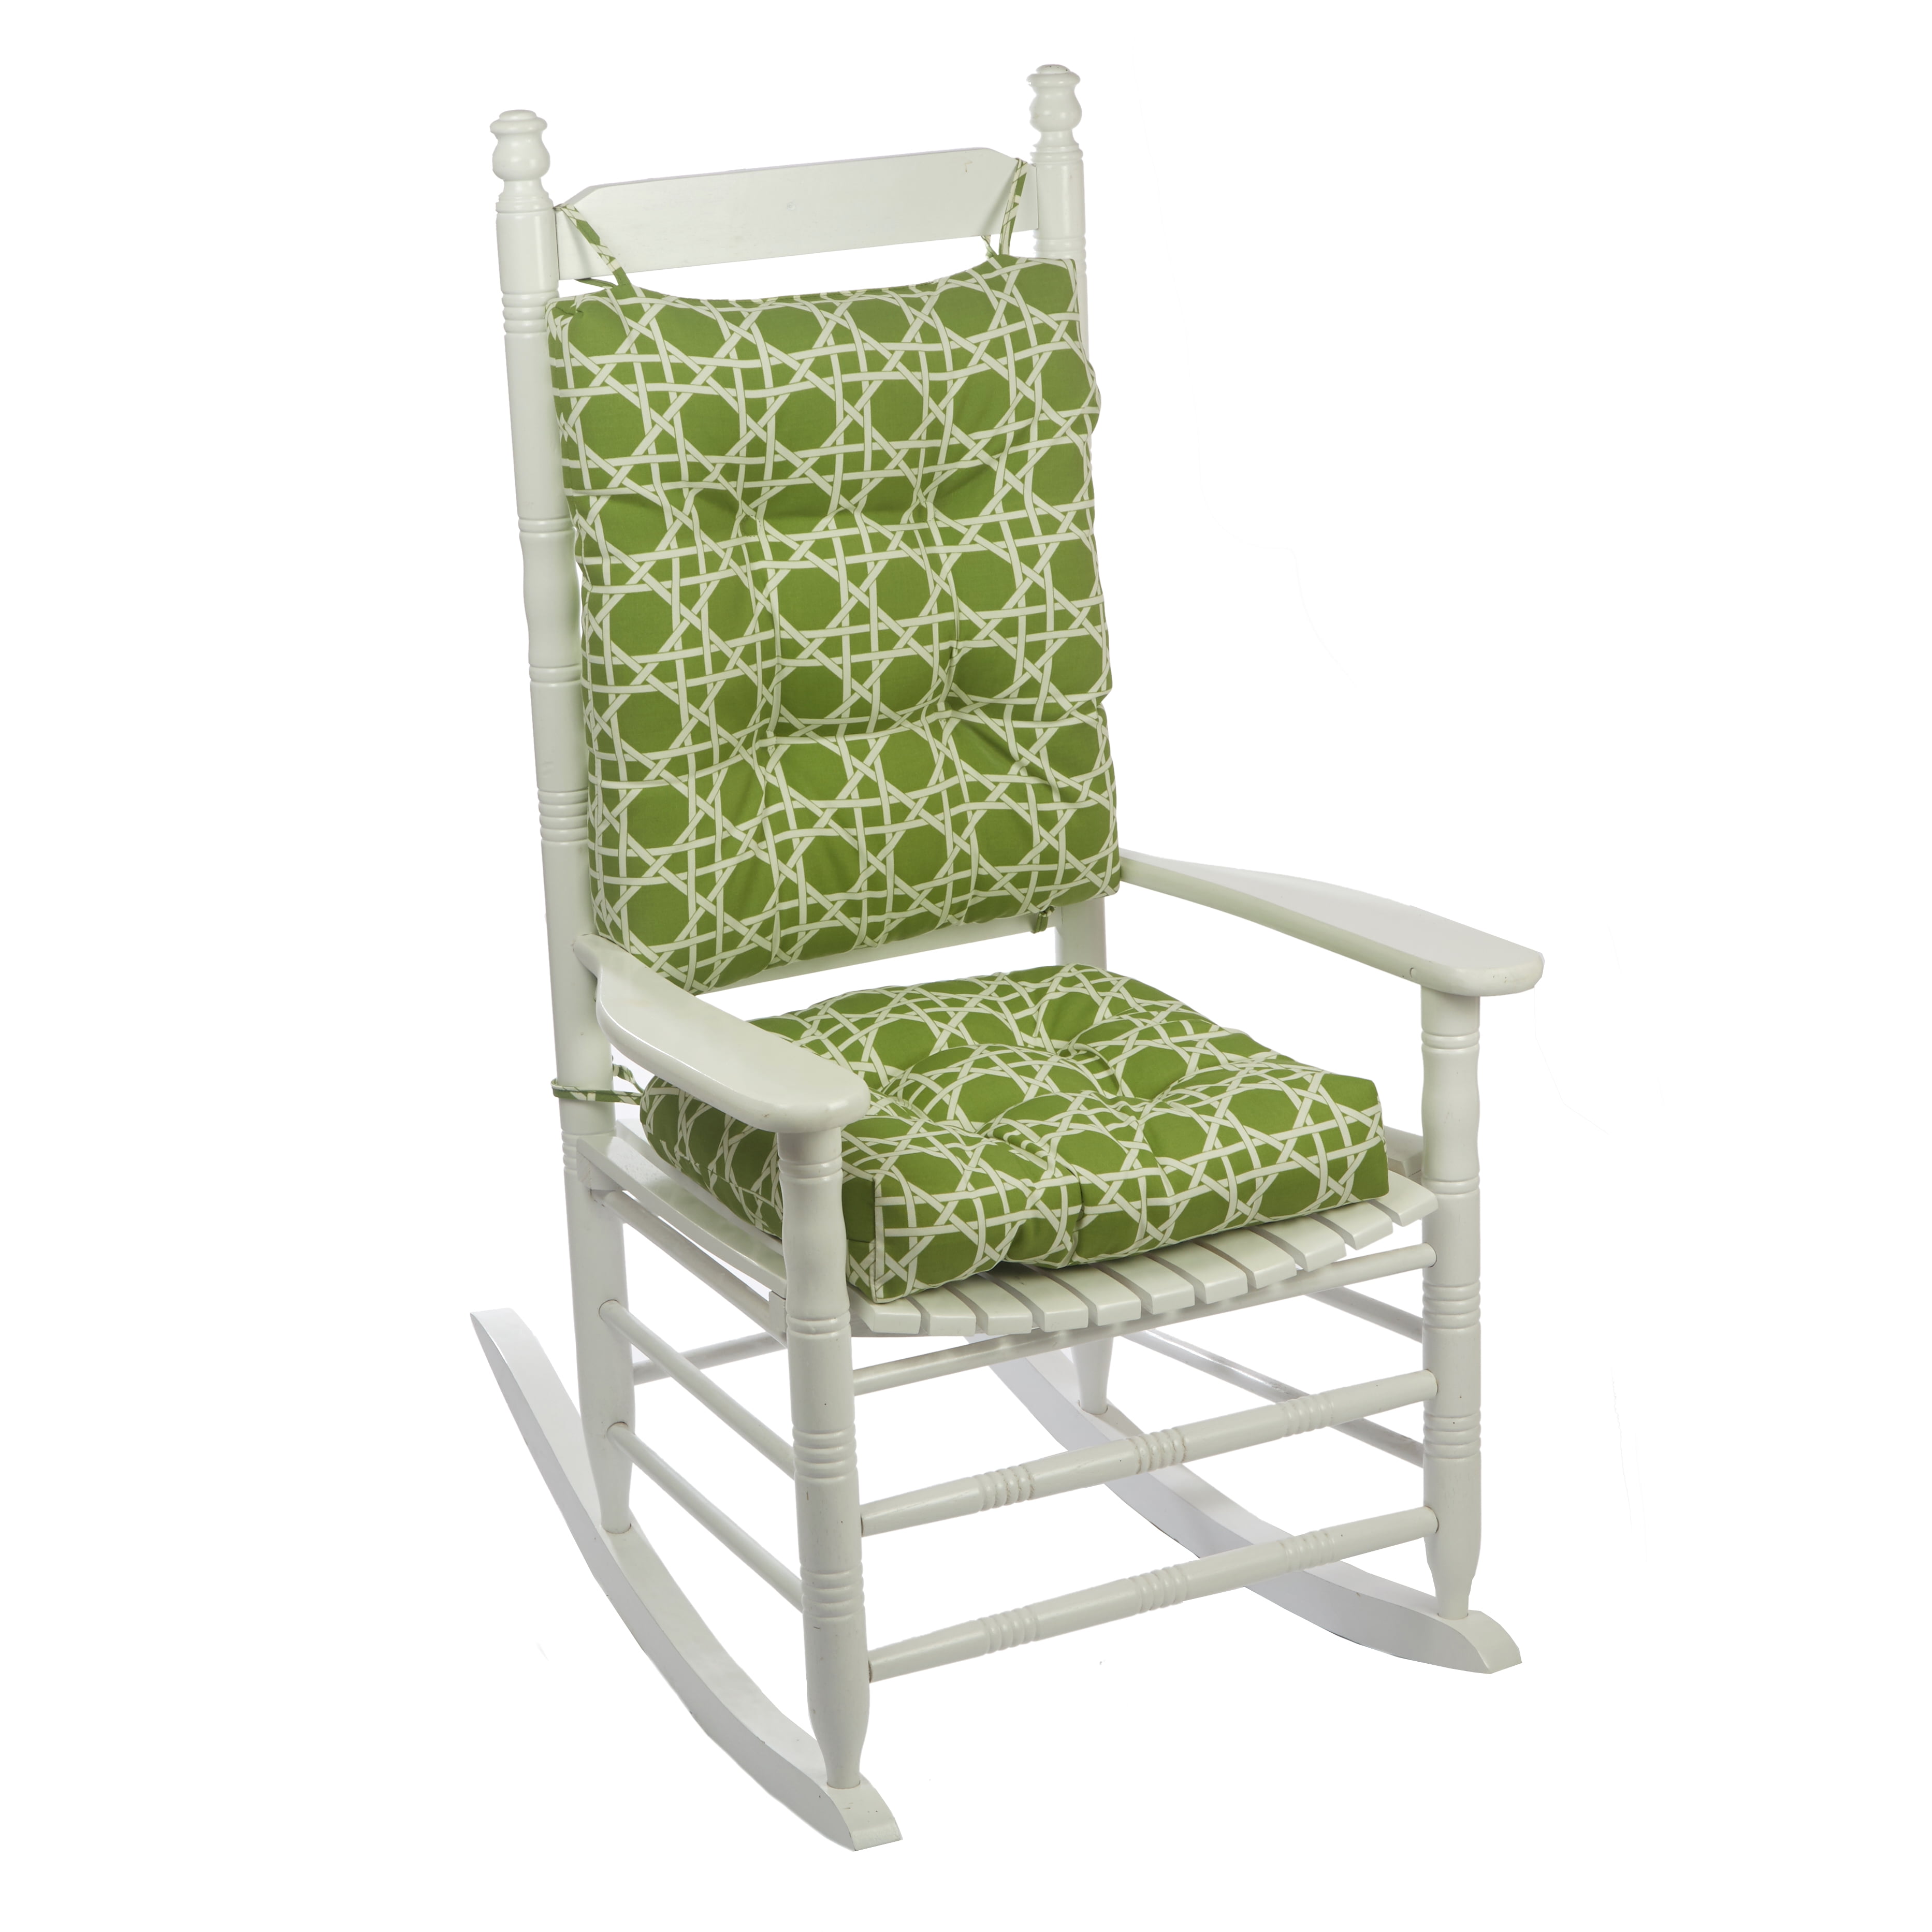 Kane Palm Rocking Chair Cushion Set, Cushions For Outdoor Wooden Rocking Chairs